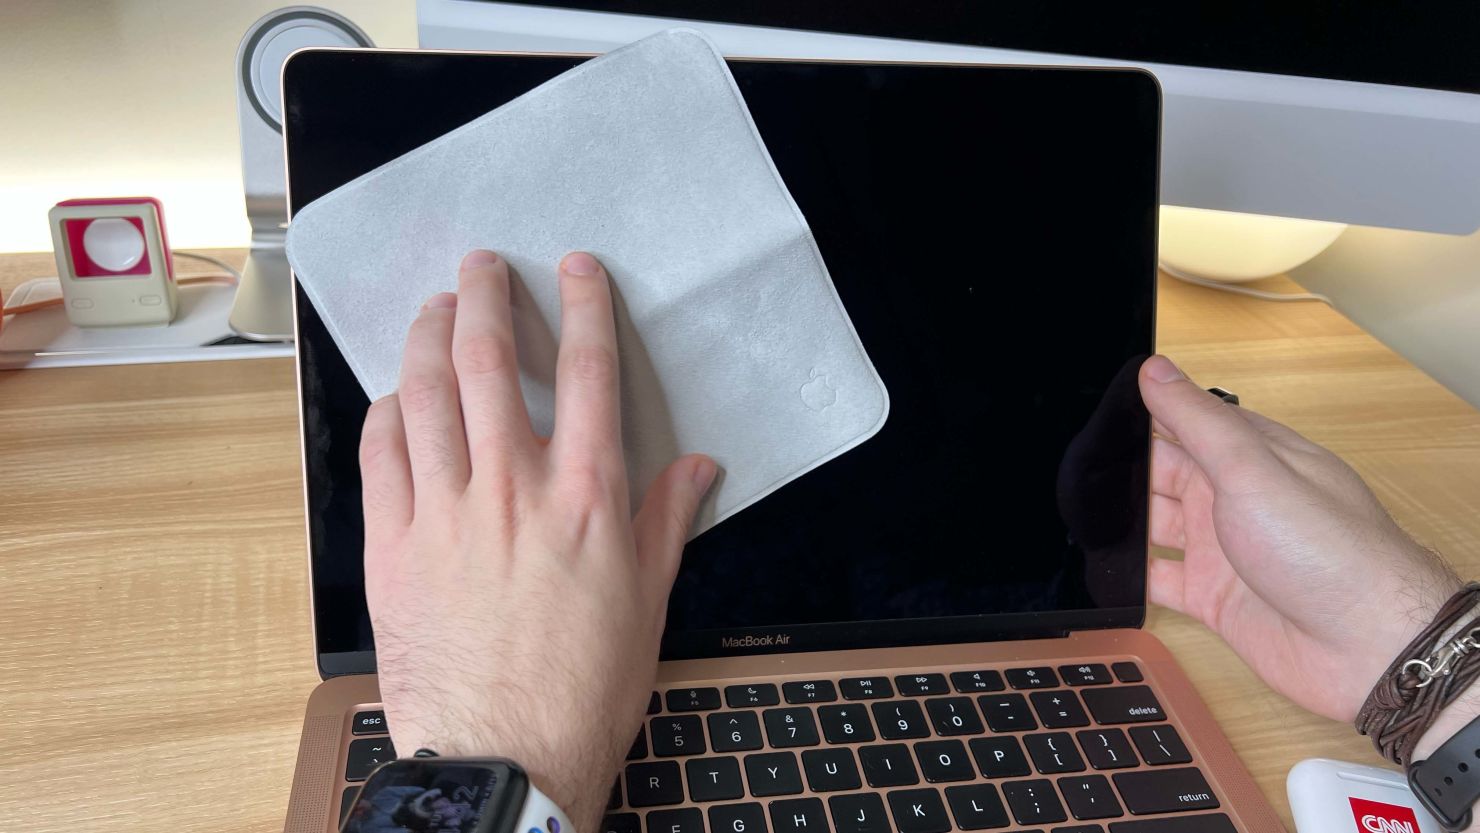 Apple Polishing Cloth review: Is the $19 cloth worth it?